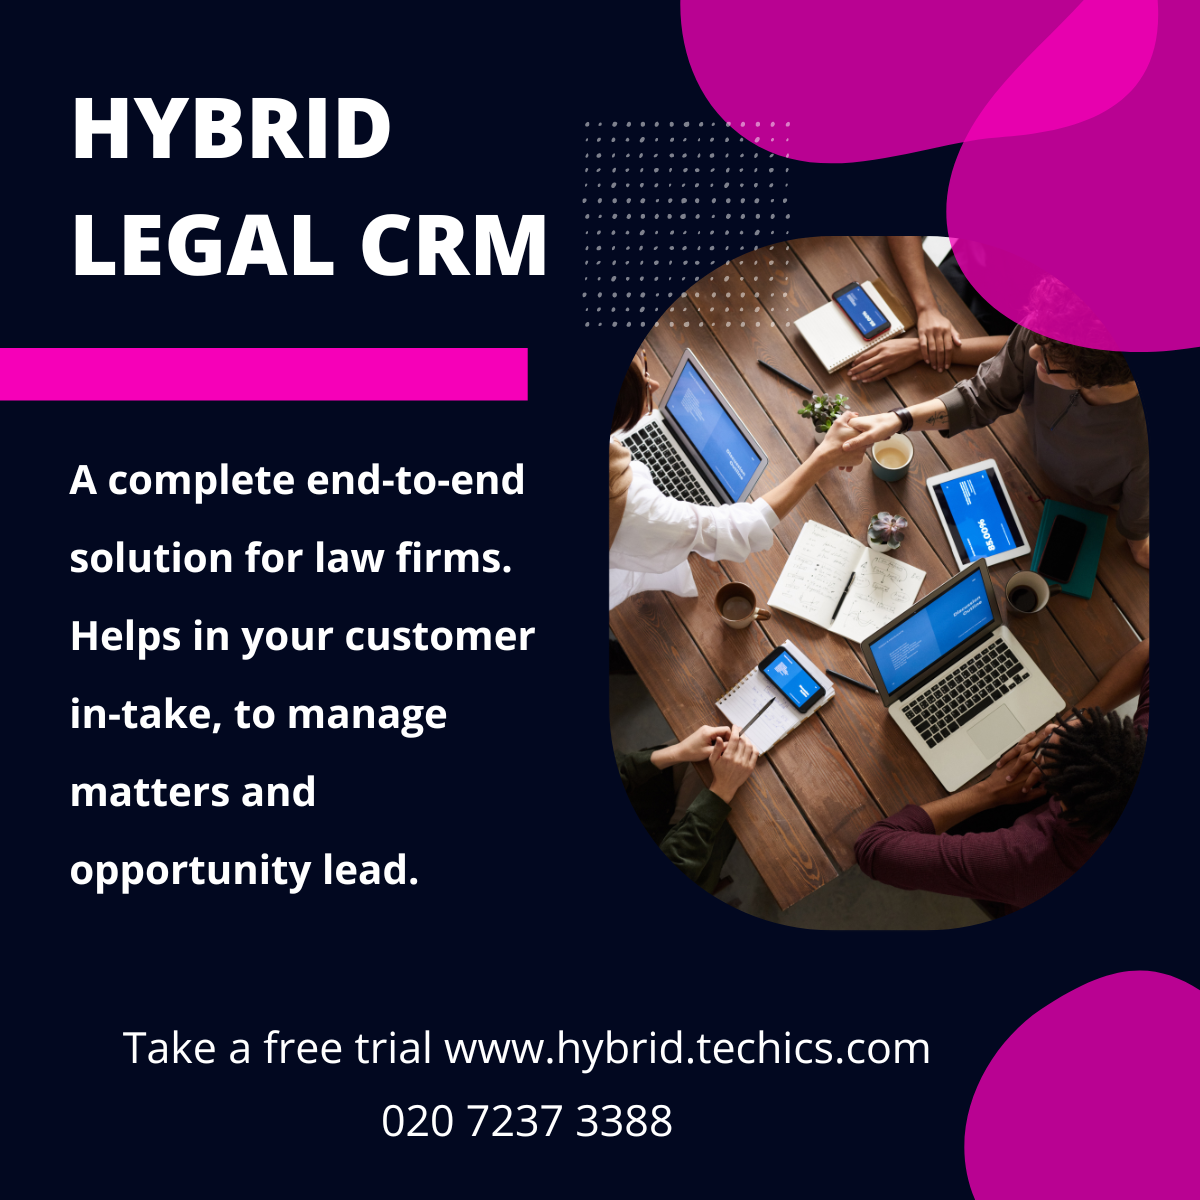 How to choose the right legal CRM for your law firm